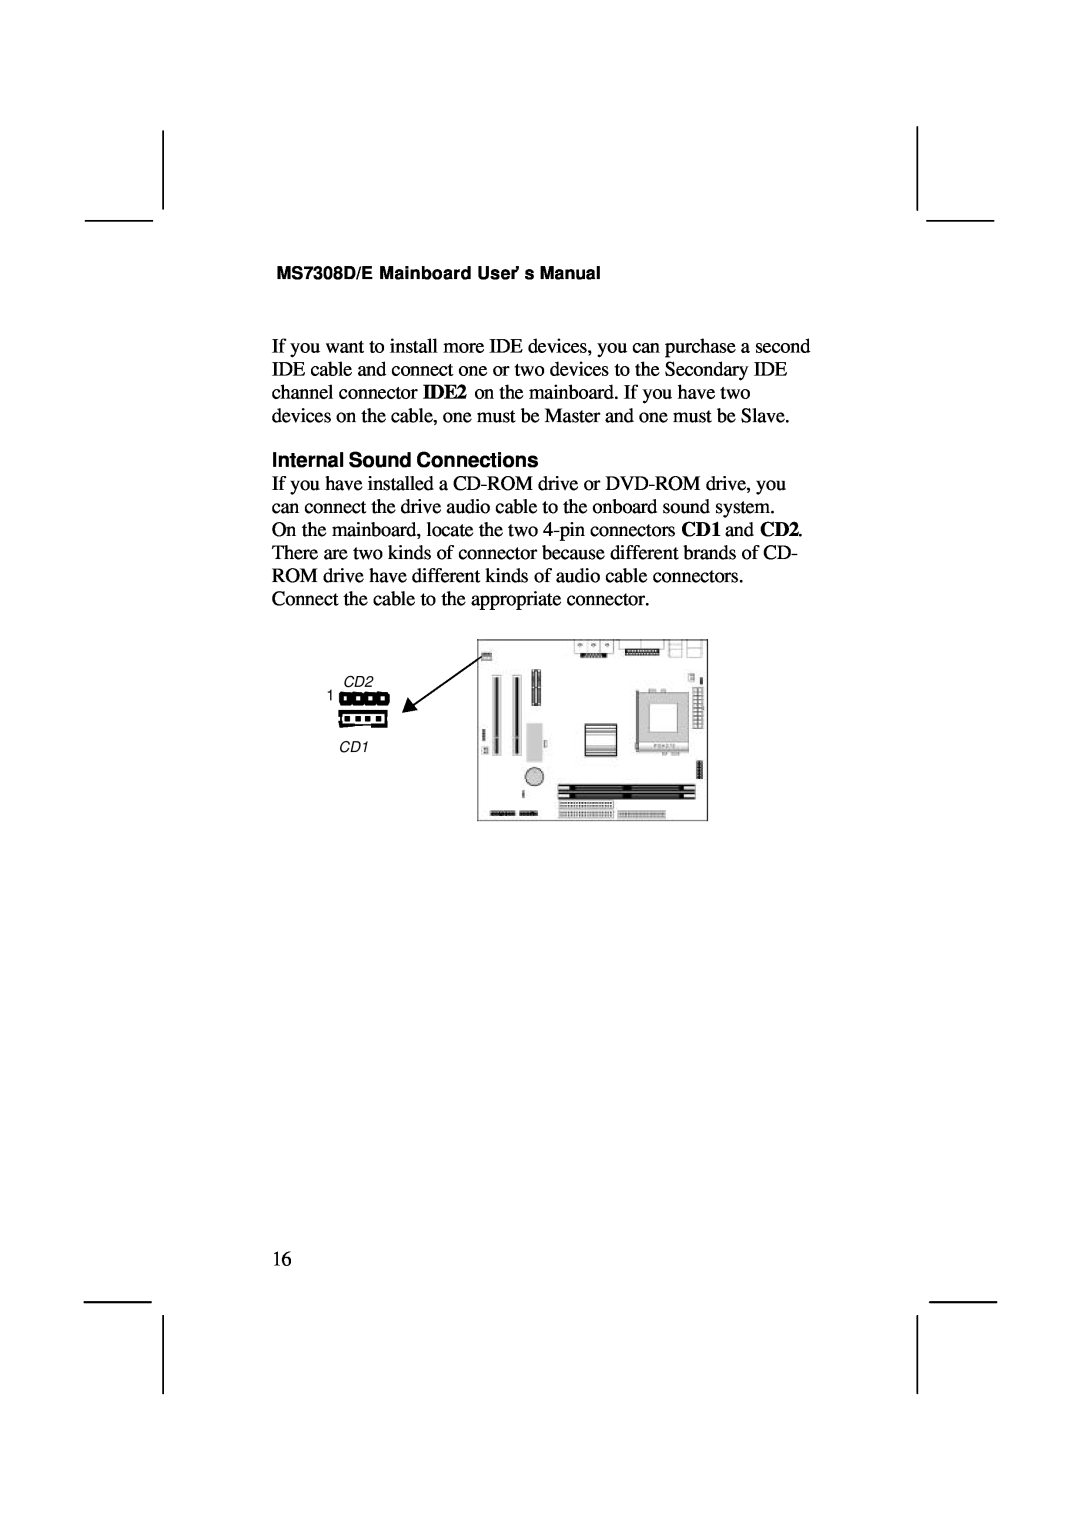 IBM V1.6 S63X/JUNE 2000, MS7308D/E user manual Internal Sound Connections 